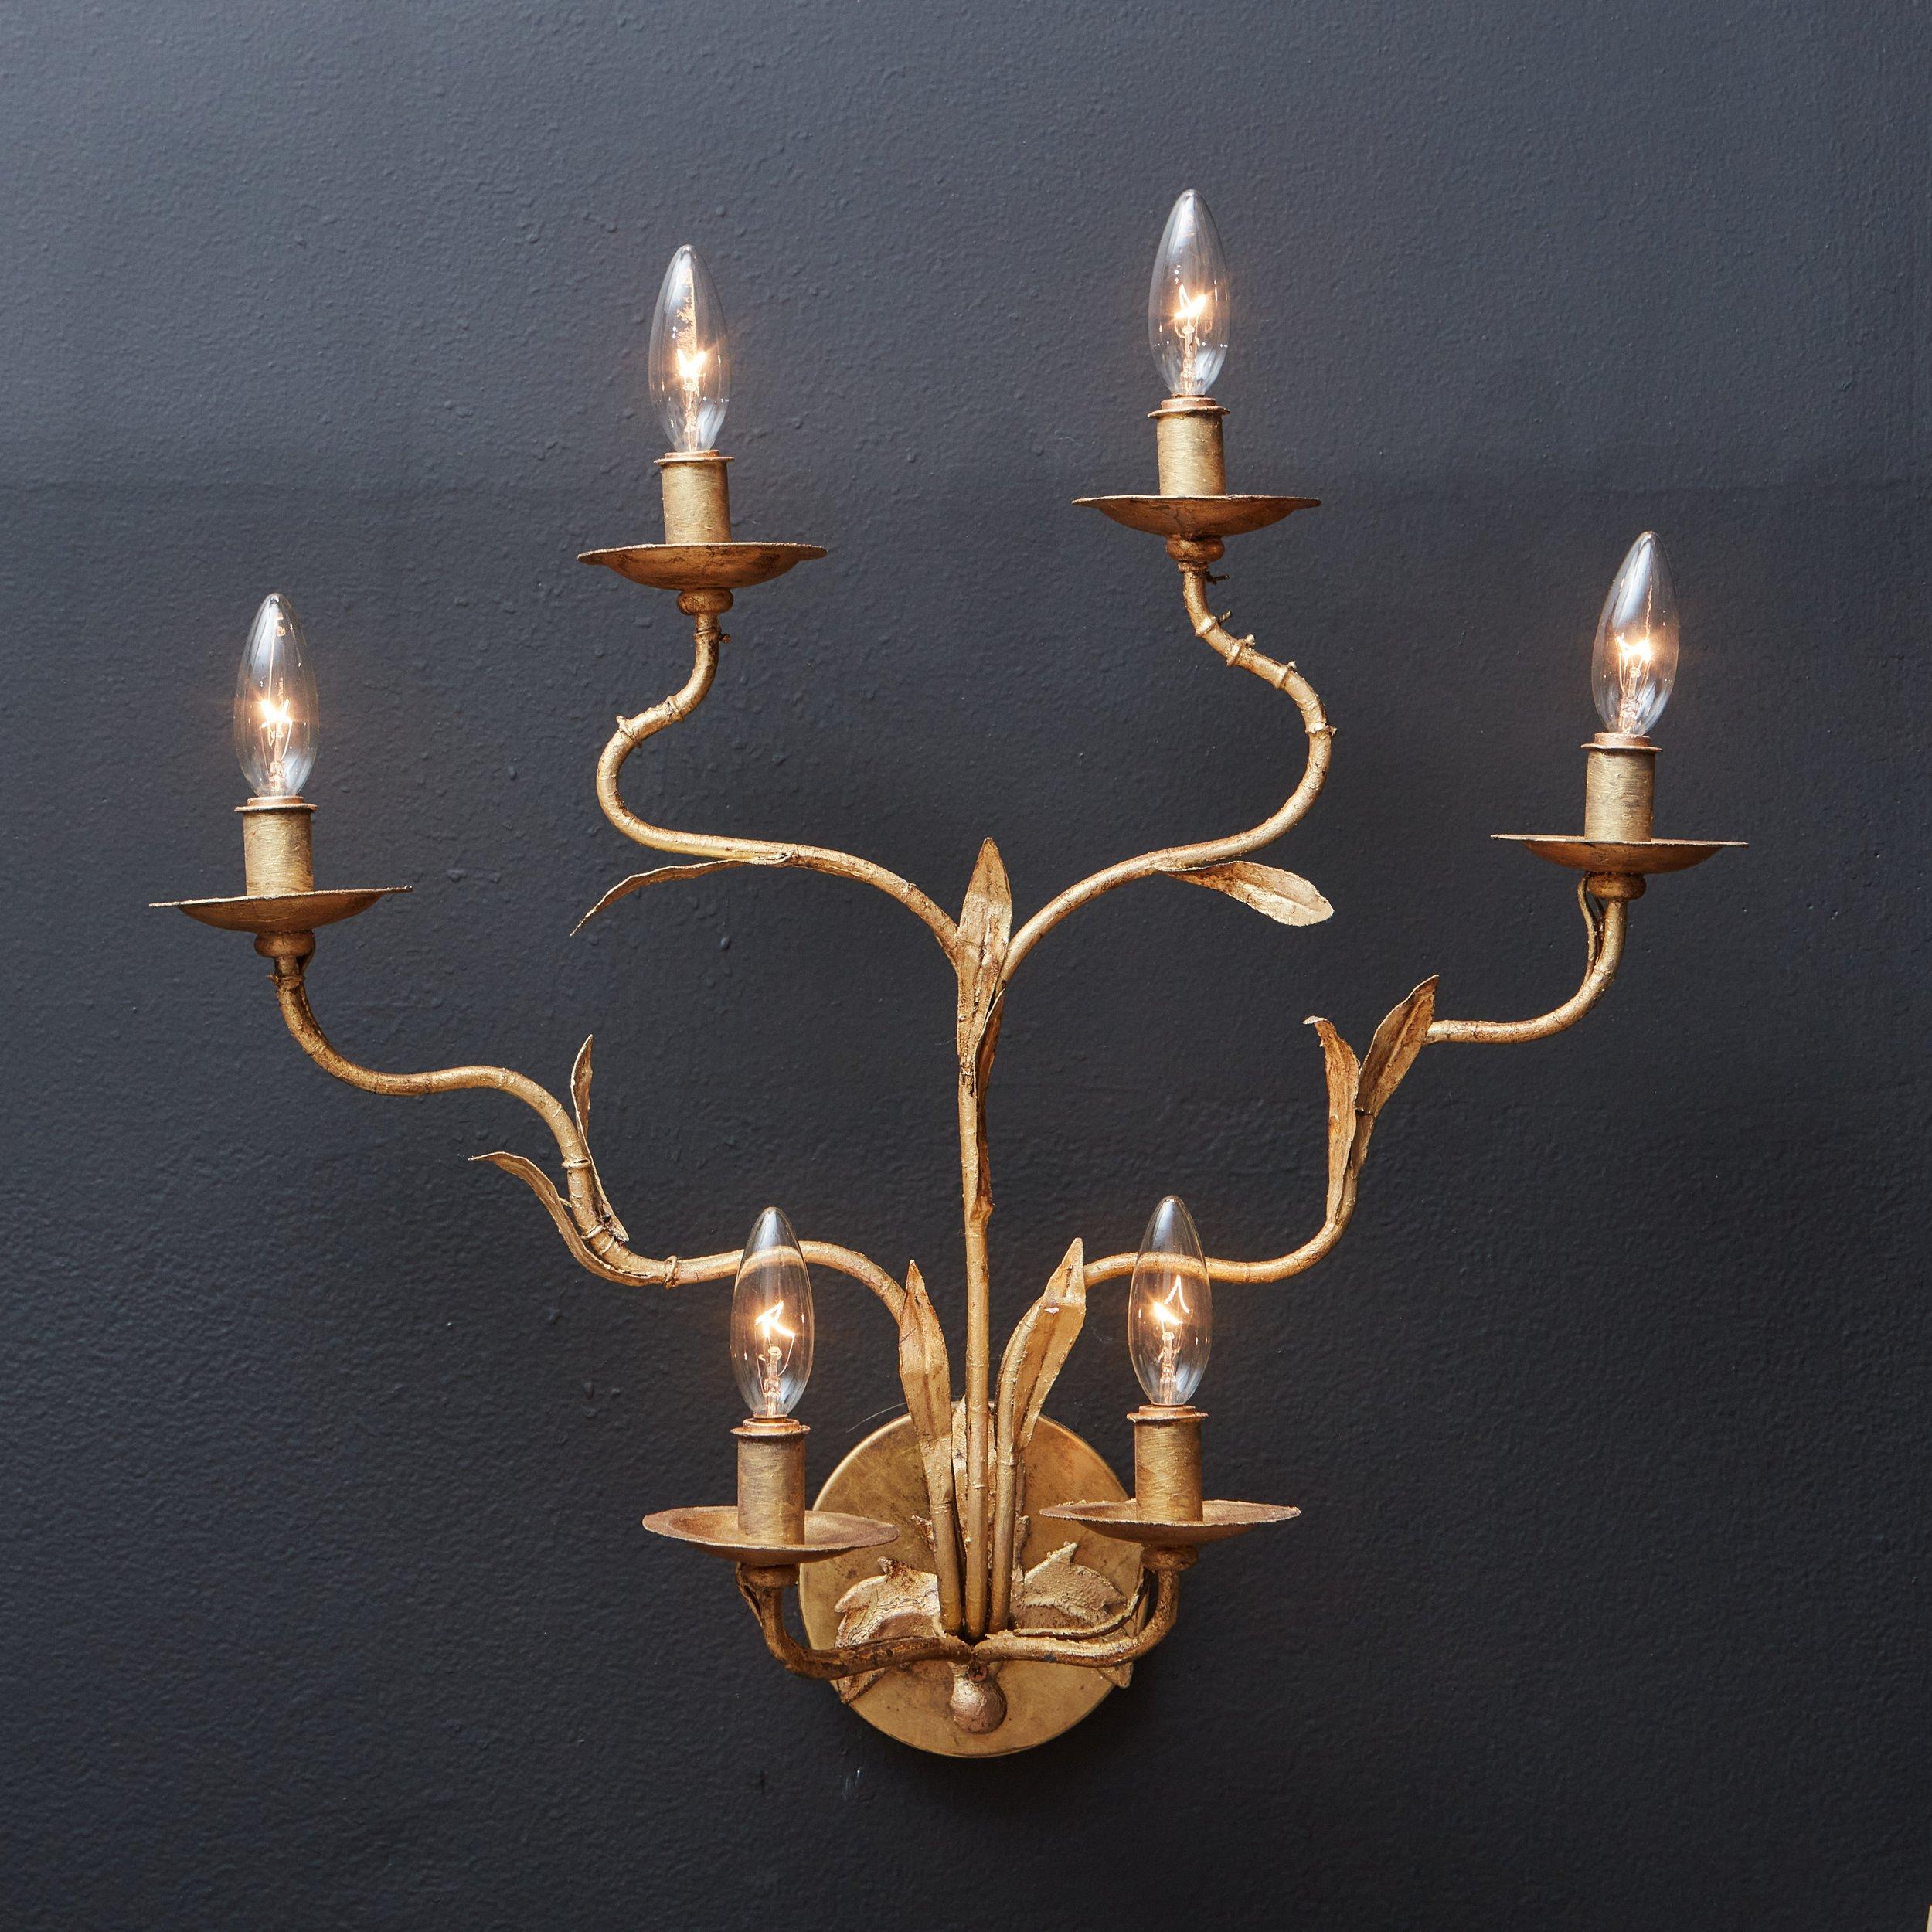 A pair of 1960s Italian sconces featuring six curved arms with leaf detailing, reminiscent of a branch. Each arm has a bobeche and accepts one candelabra light bulb. These sconces were constructed with metal and have a stunning hand applied gold